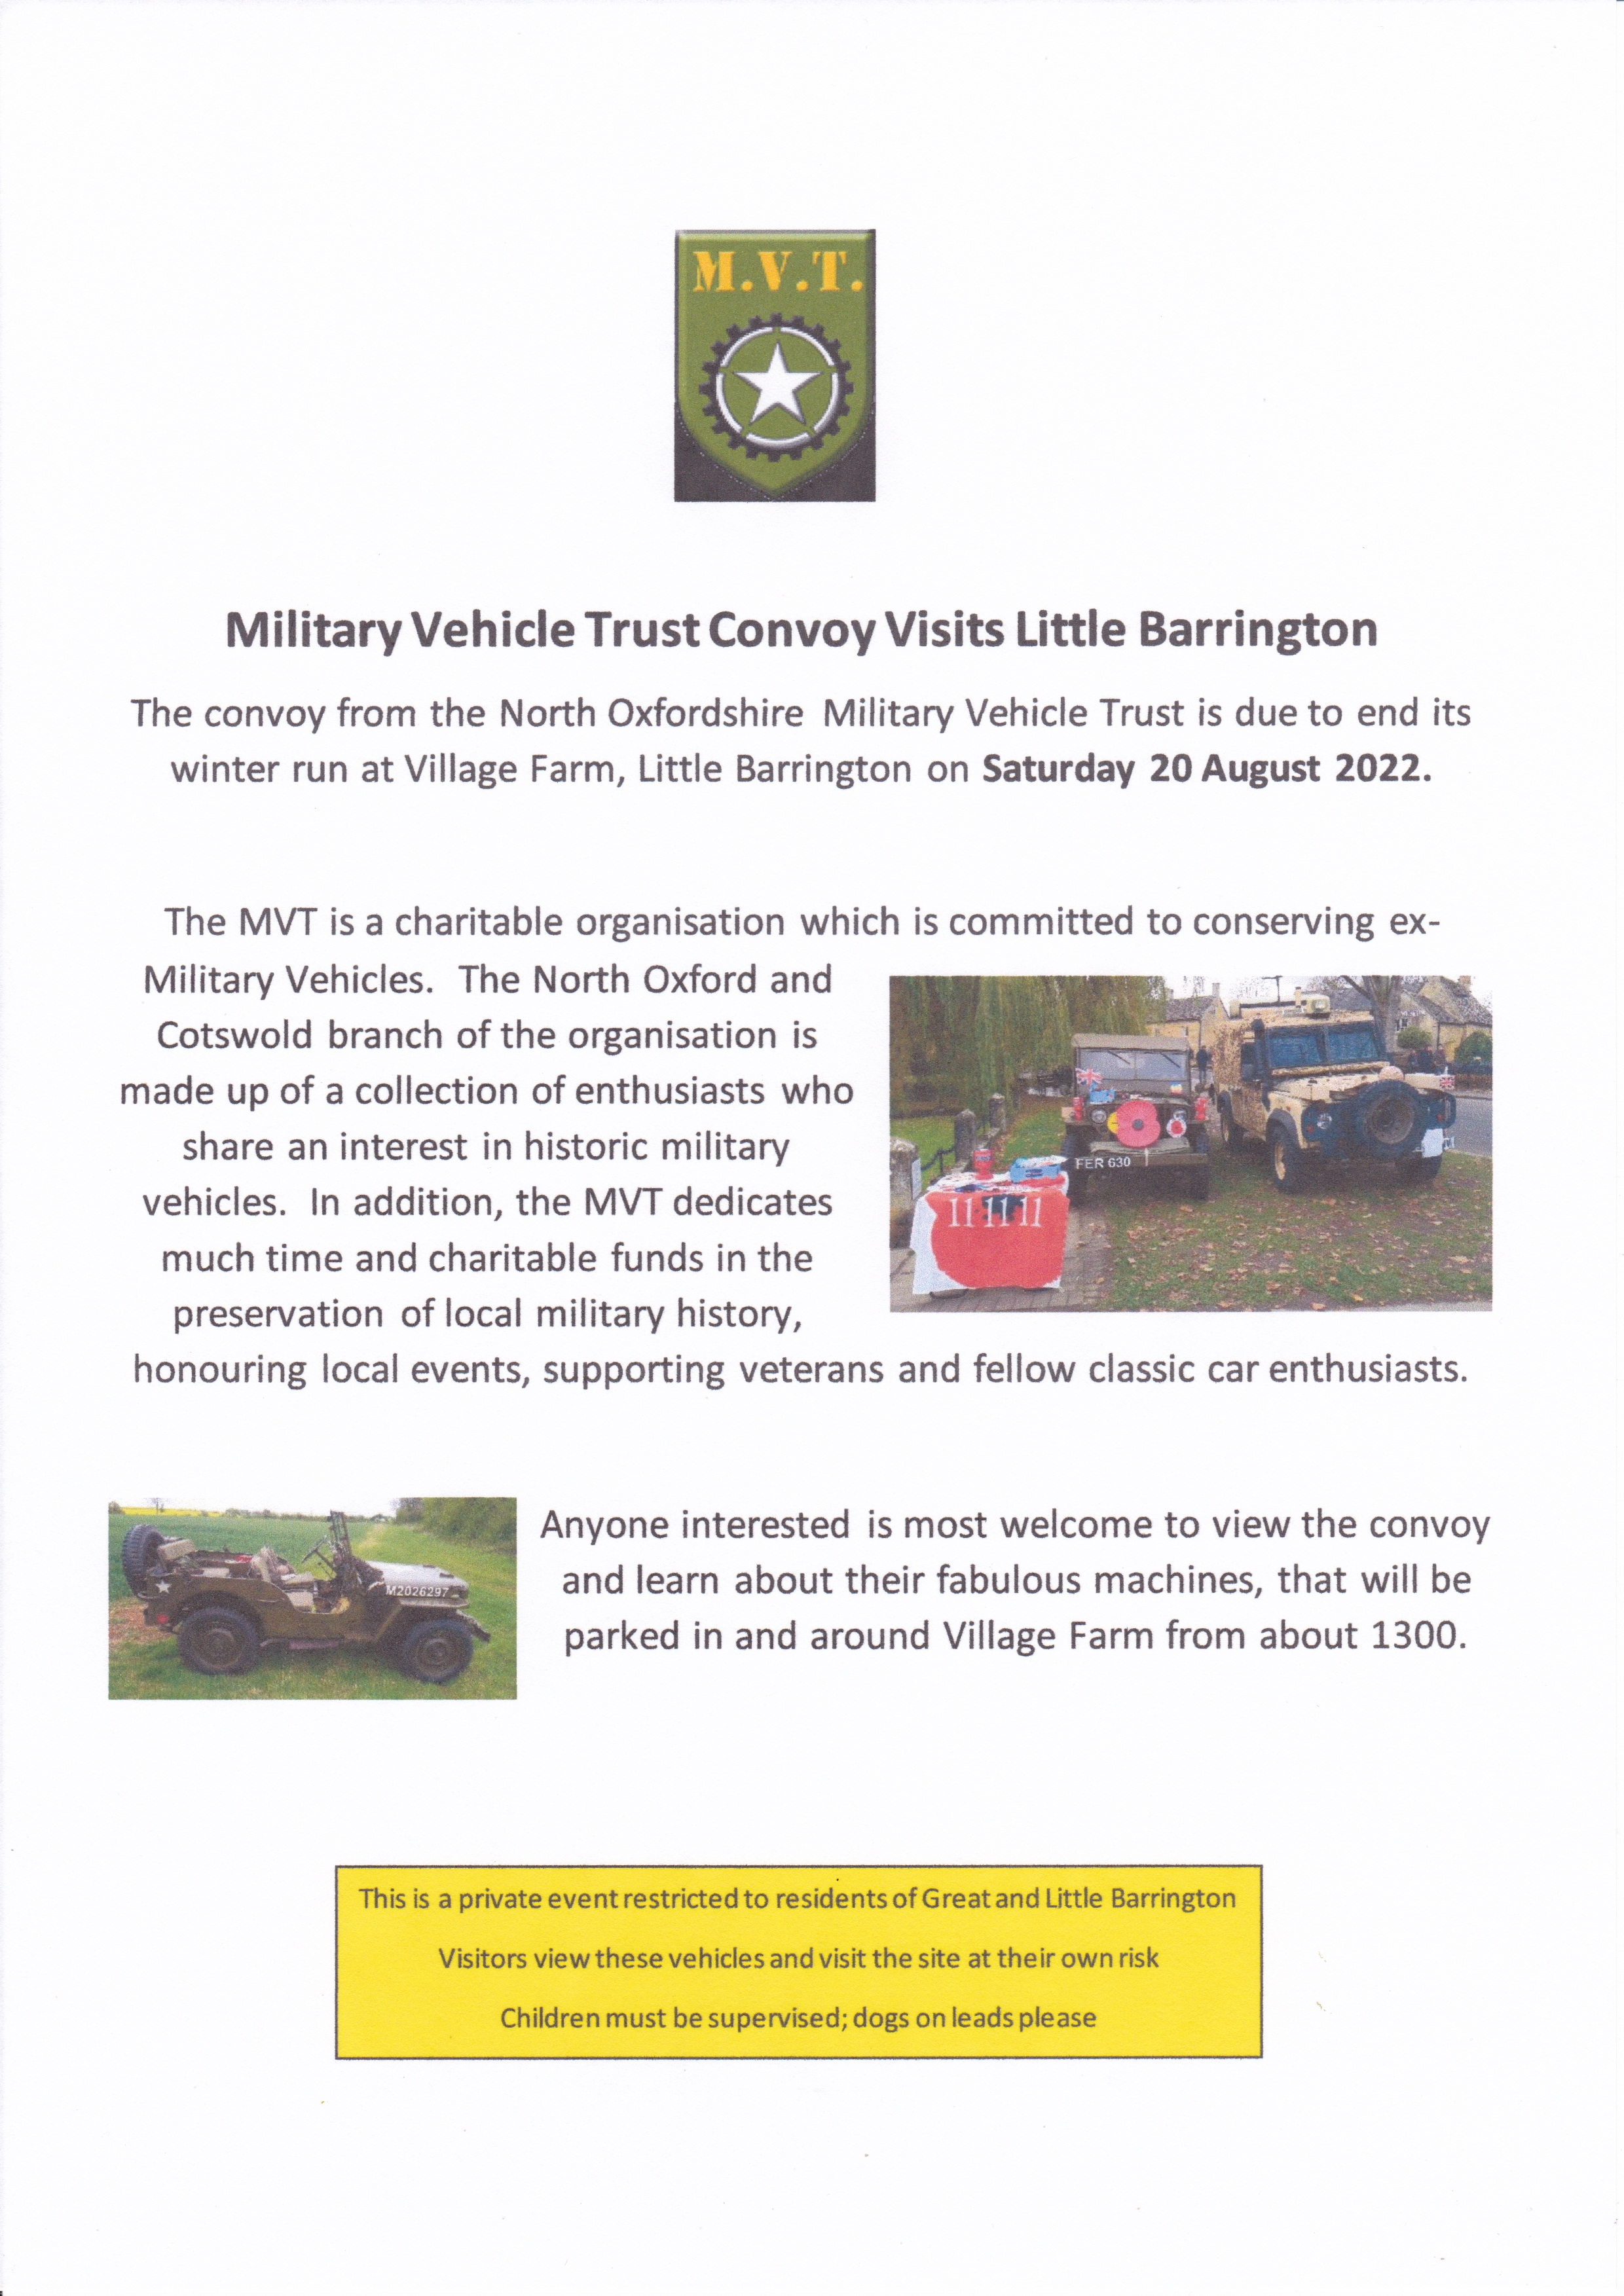 Military Vehicle Trust Convoy Poster